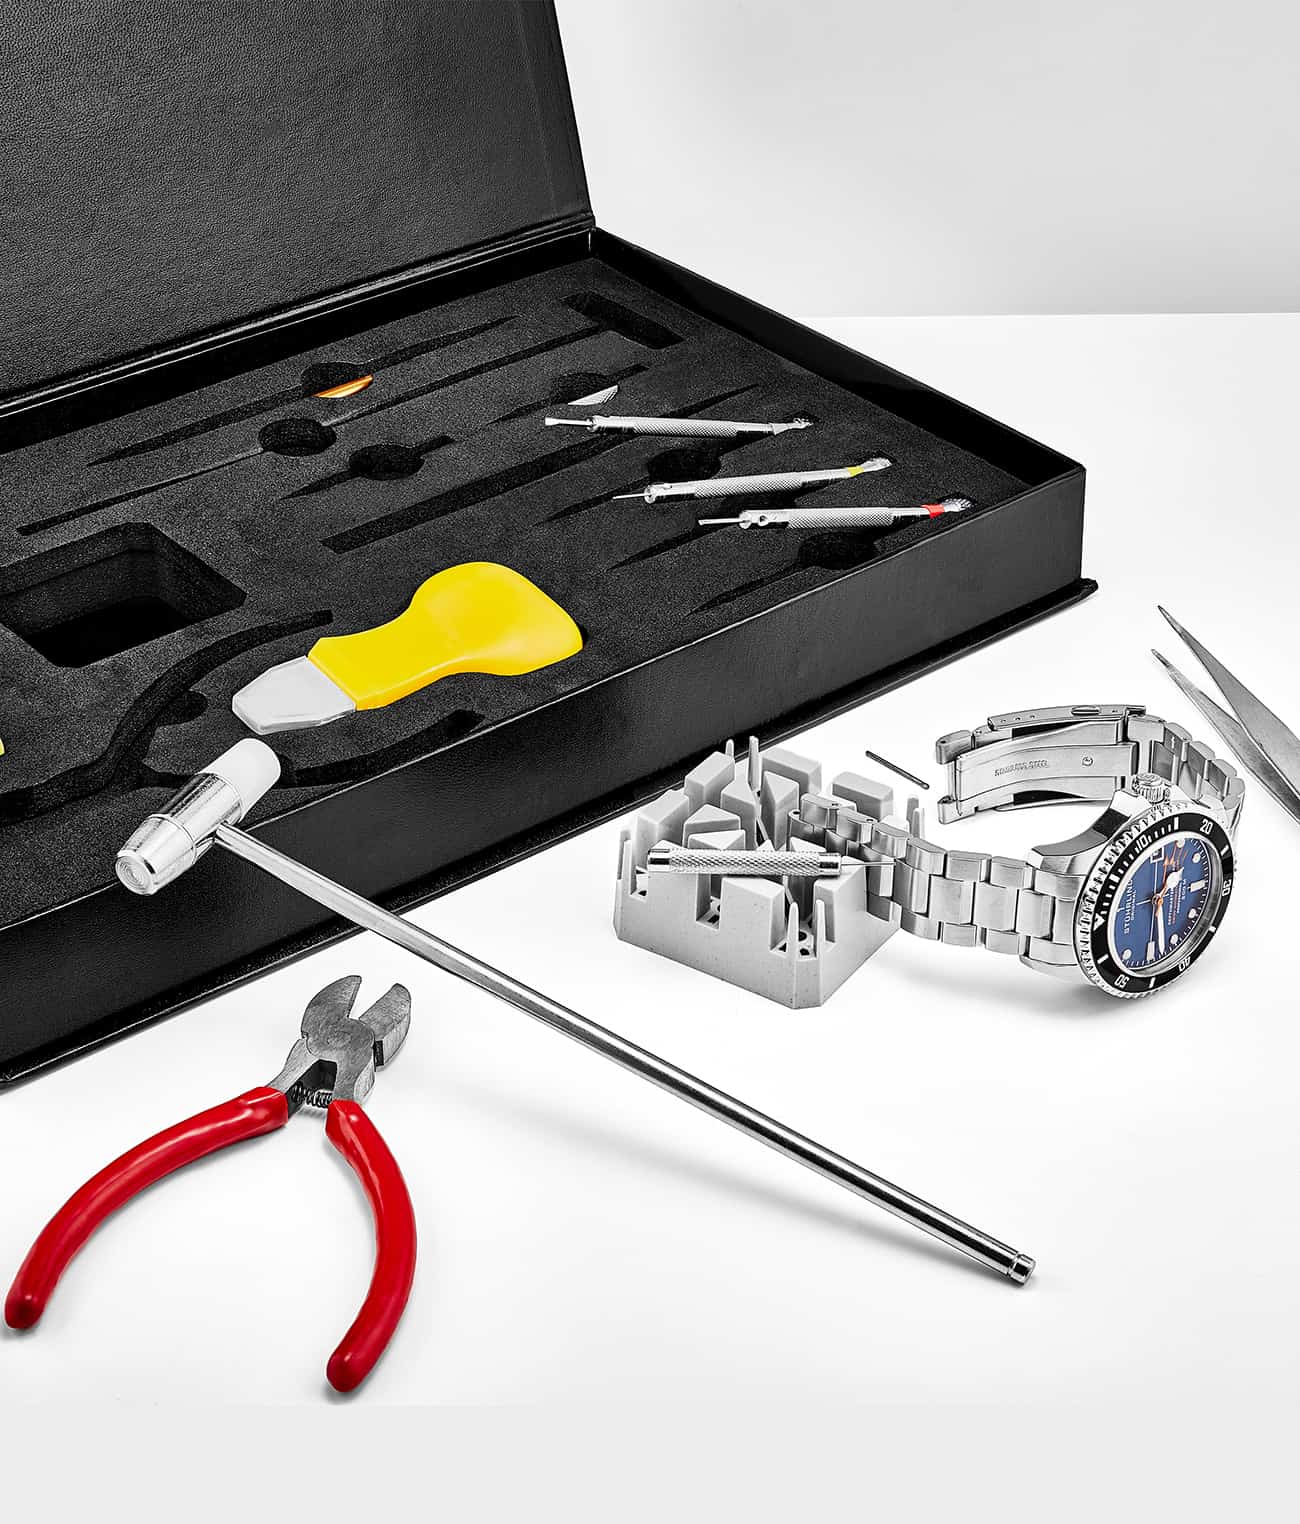 Depthmaster 883.01, Sion 1001.02, Signature Pen, and Watch Tool Kit